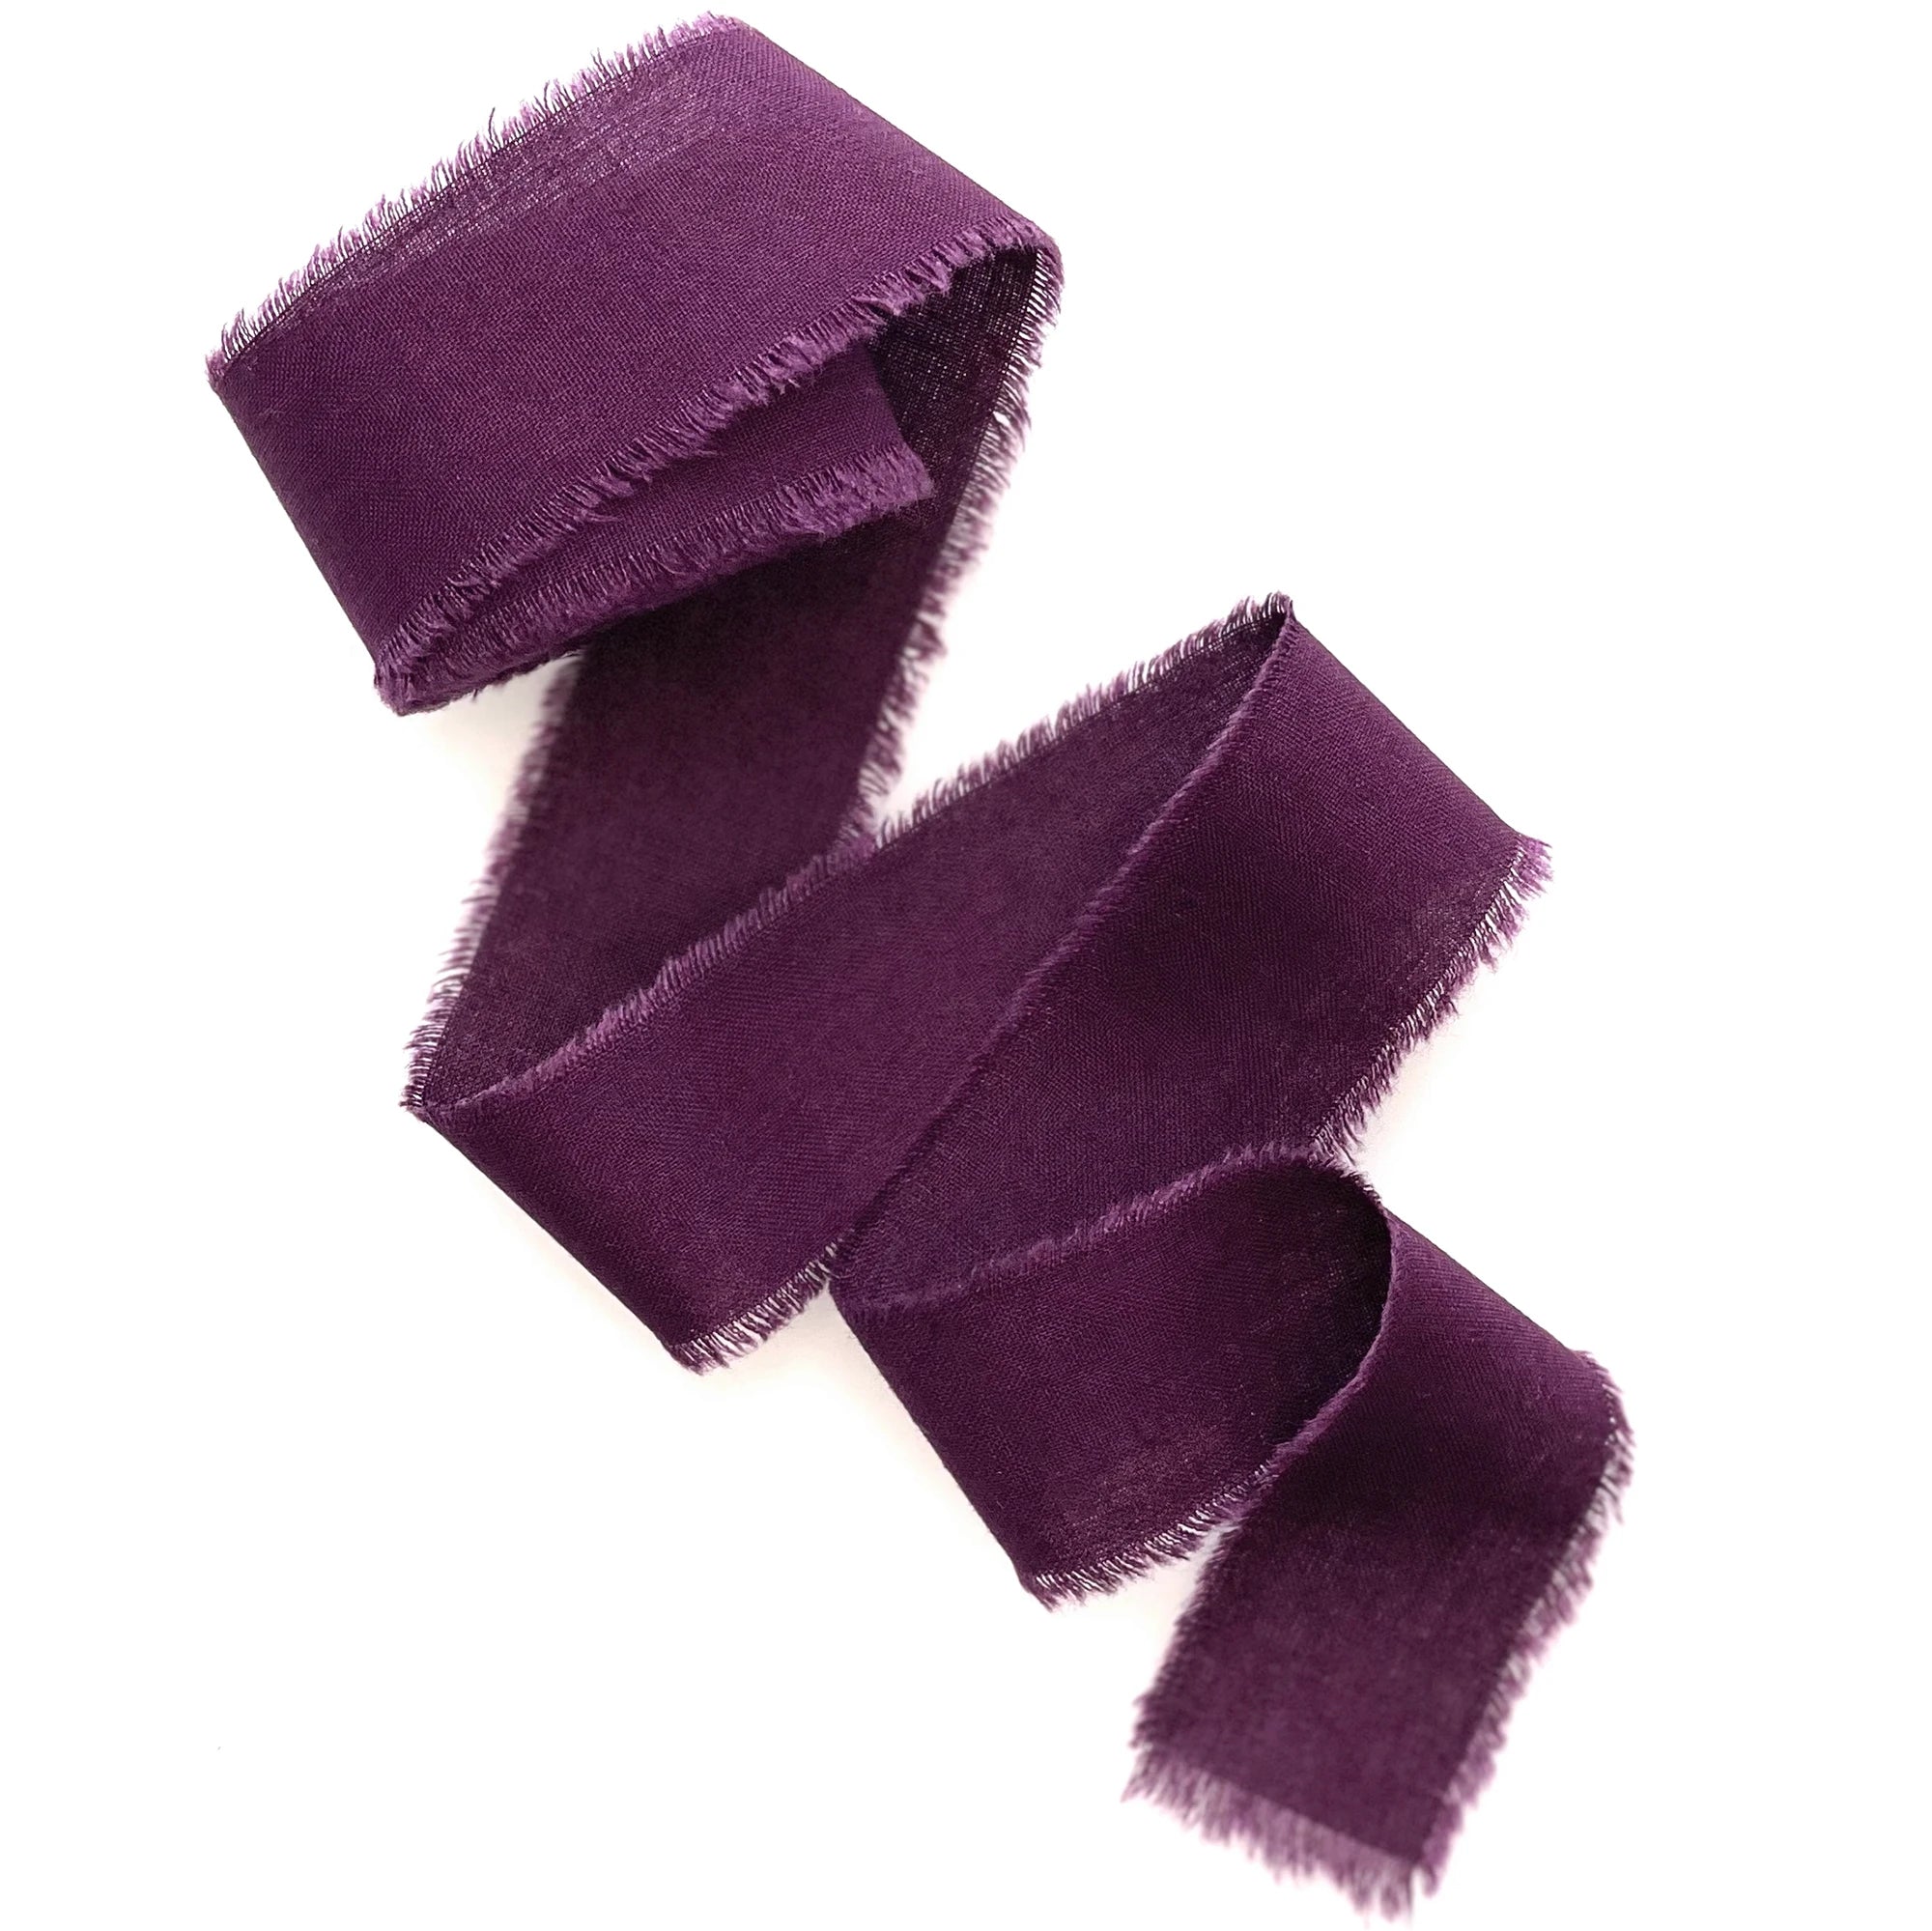 Silk cotton hand dyed plum fringle ribbon with raw edges 1 inch wide